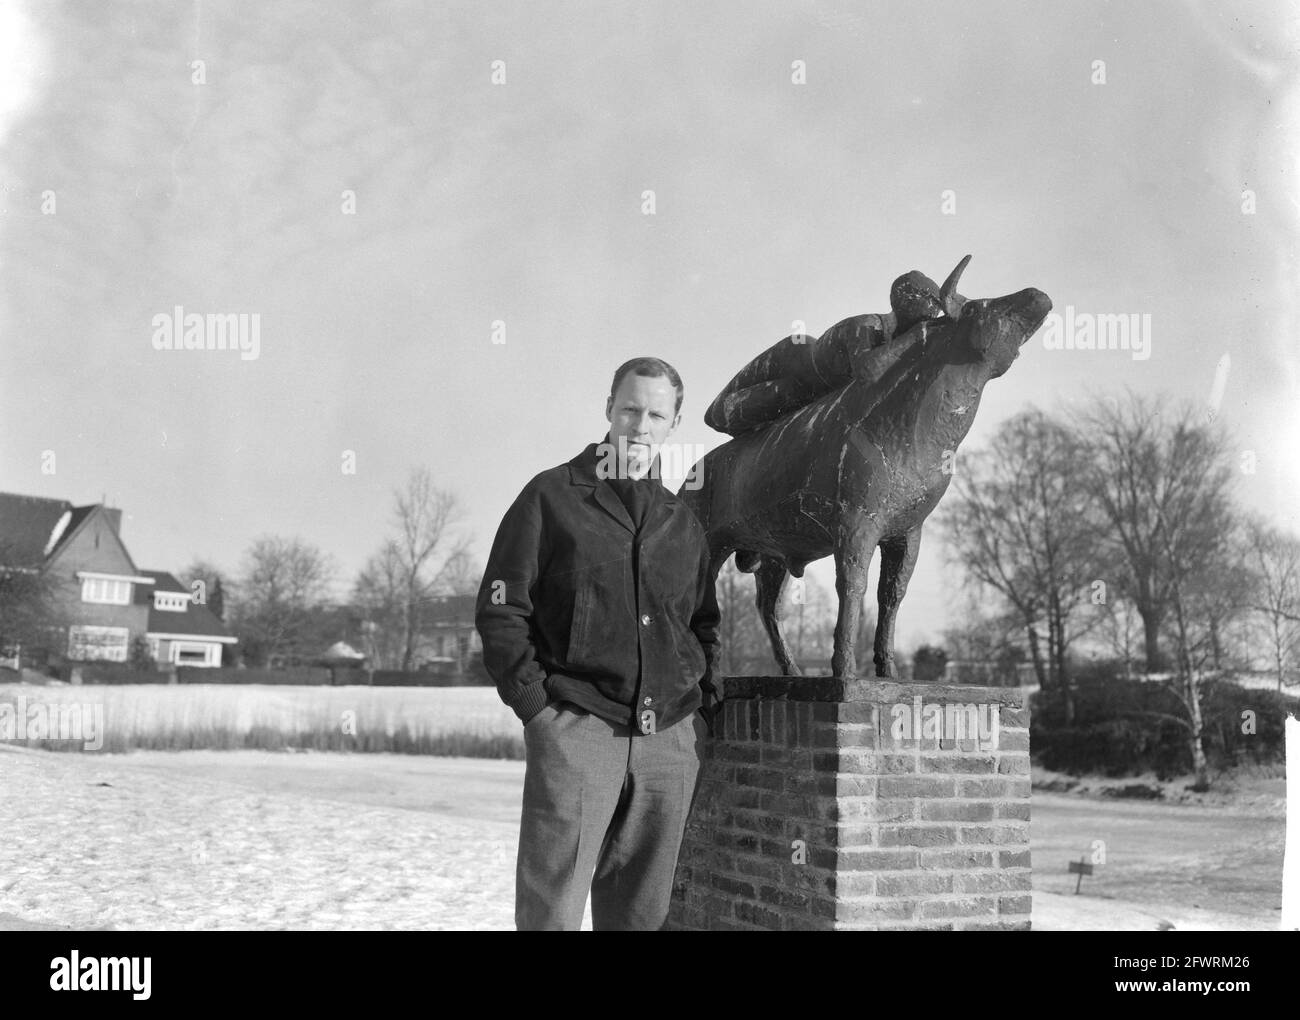 Cultuurprijs 1963 to the Naarden sculptor Ek van Zanten, January 31, 1963, sculptors, award ceremonies, The Netherlands, 20th century press agency photo, news to remember, documentary, historic photography 1945-1990, visual stories, human history of the Twentieth Century, capturing moments in time Stock Photo